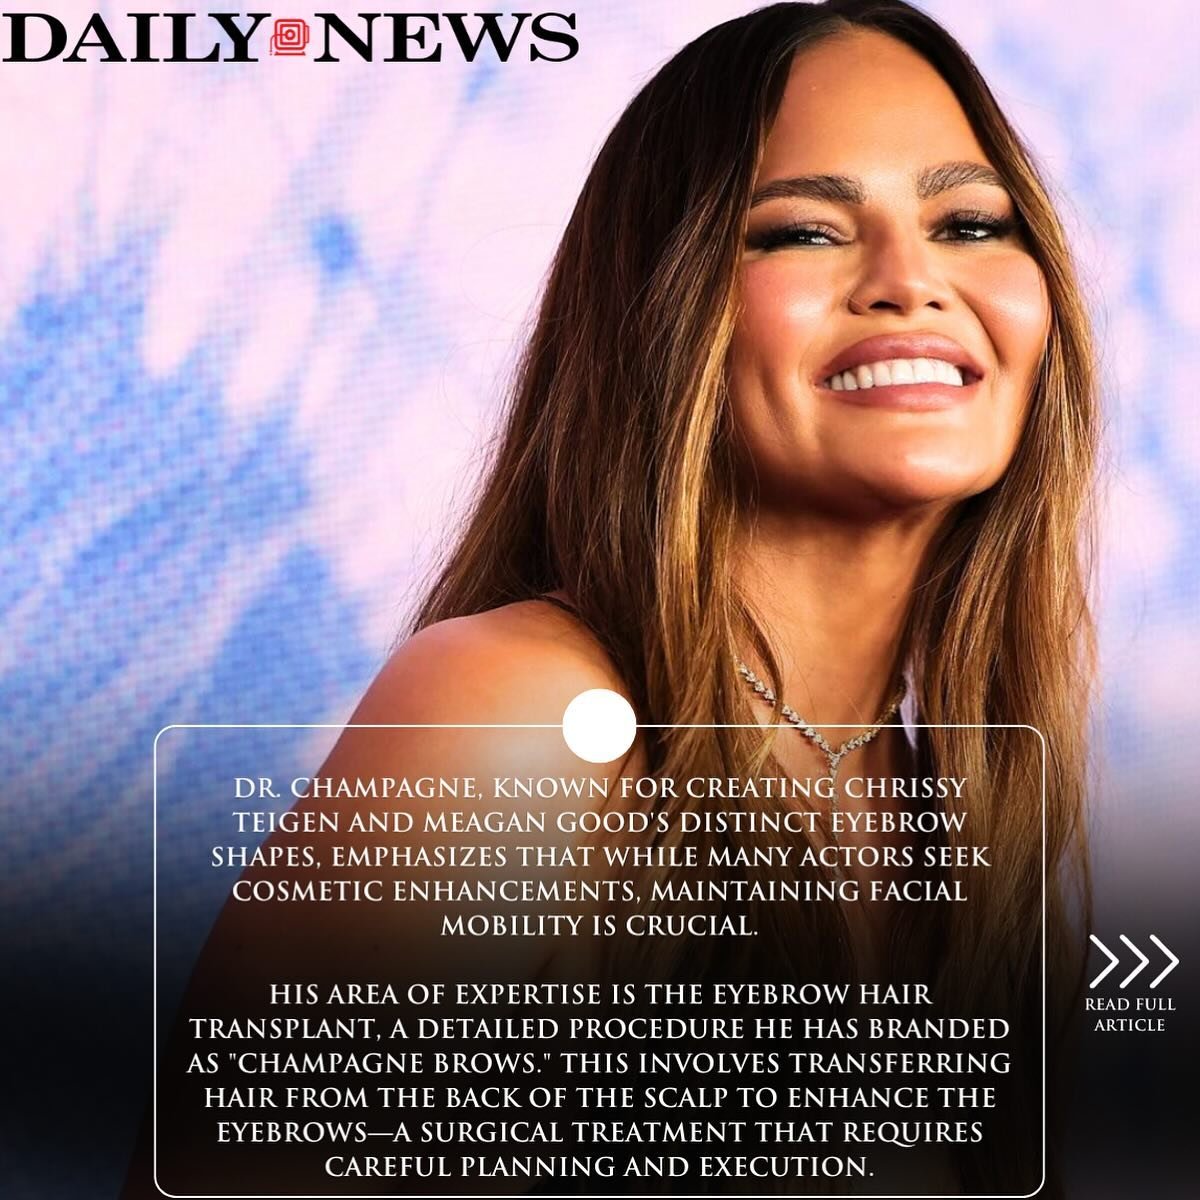 &ldquo;Dr. Champagne, known for creating Chrissy Teigen and Meagan Good&rsquo;s distinct eyebrow shapes, emphasizes that while many actors seek cosmetic enhancements, maintaining facial mobility is crucial. &ldquo;The goal should be to have lines but